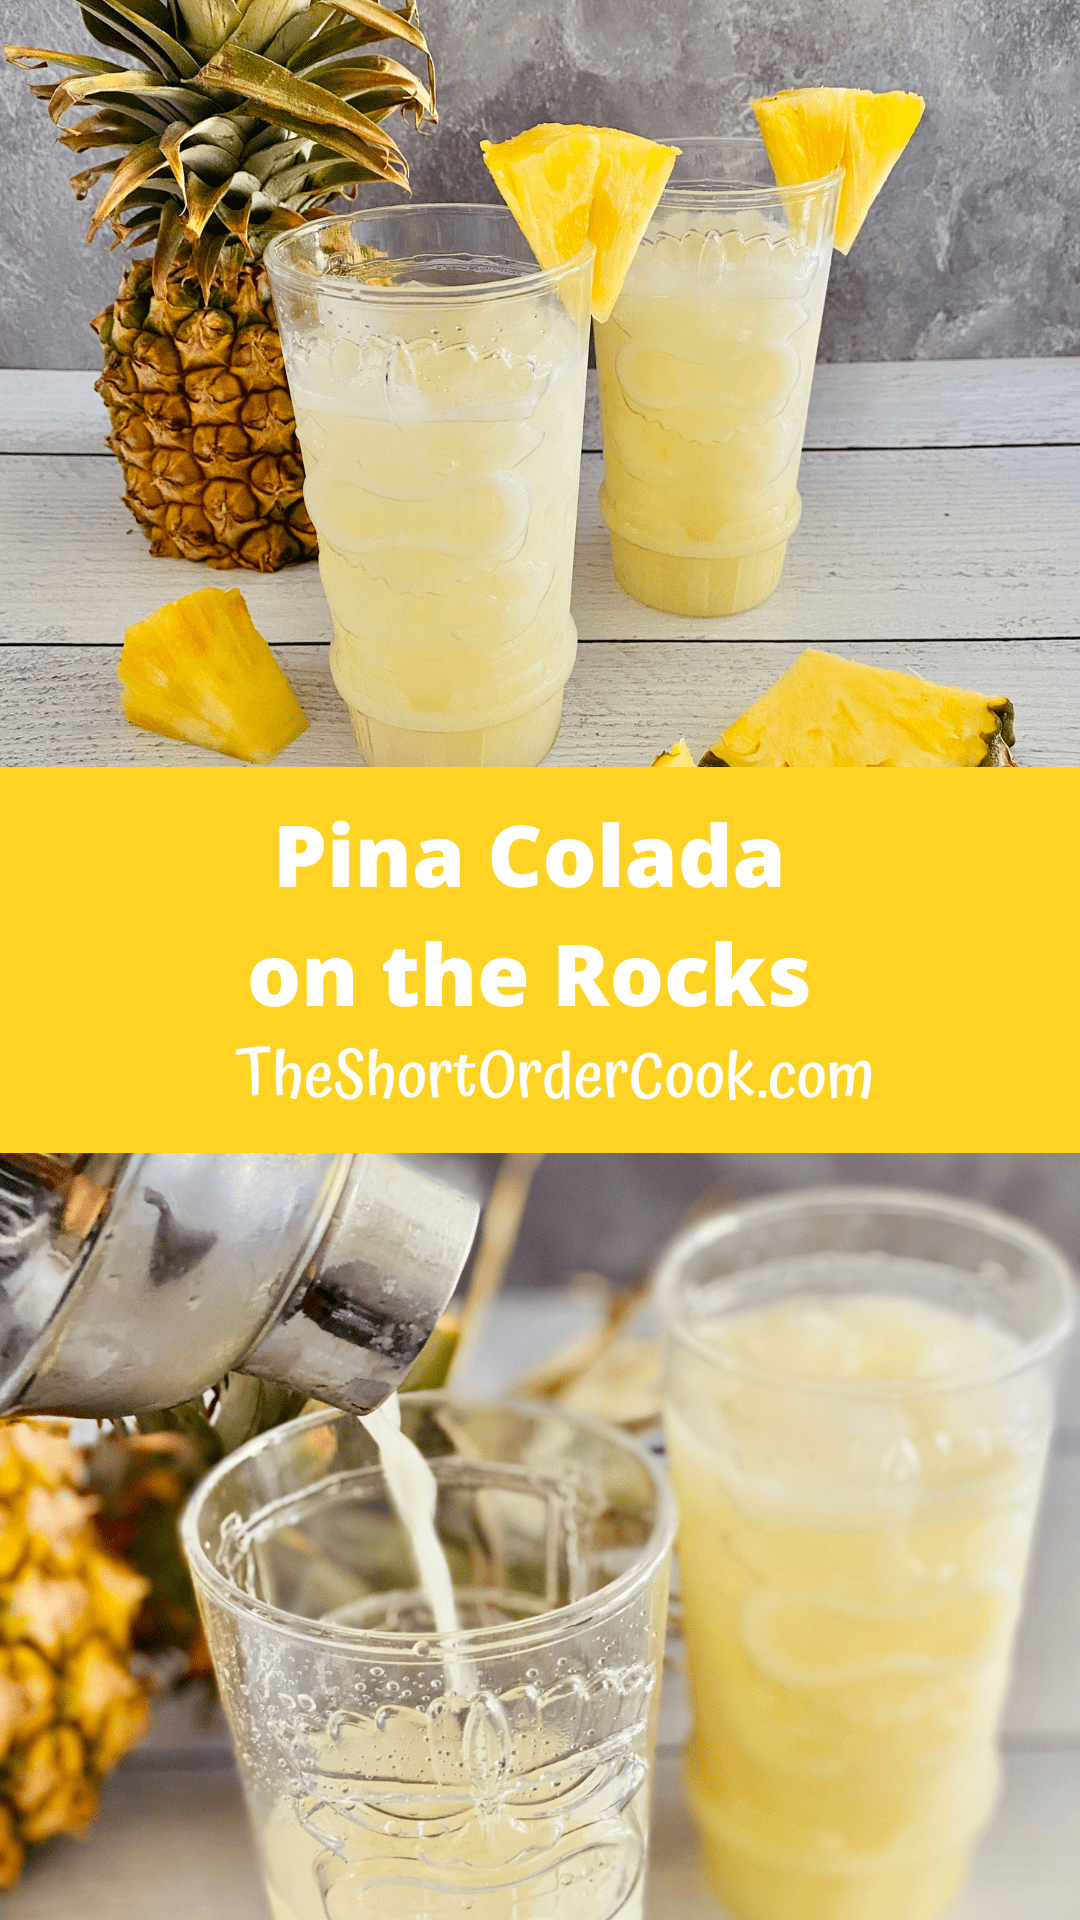 Two recipe images for pina coladas in glasses and another with the shaker of cocktail being poured into a glass.